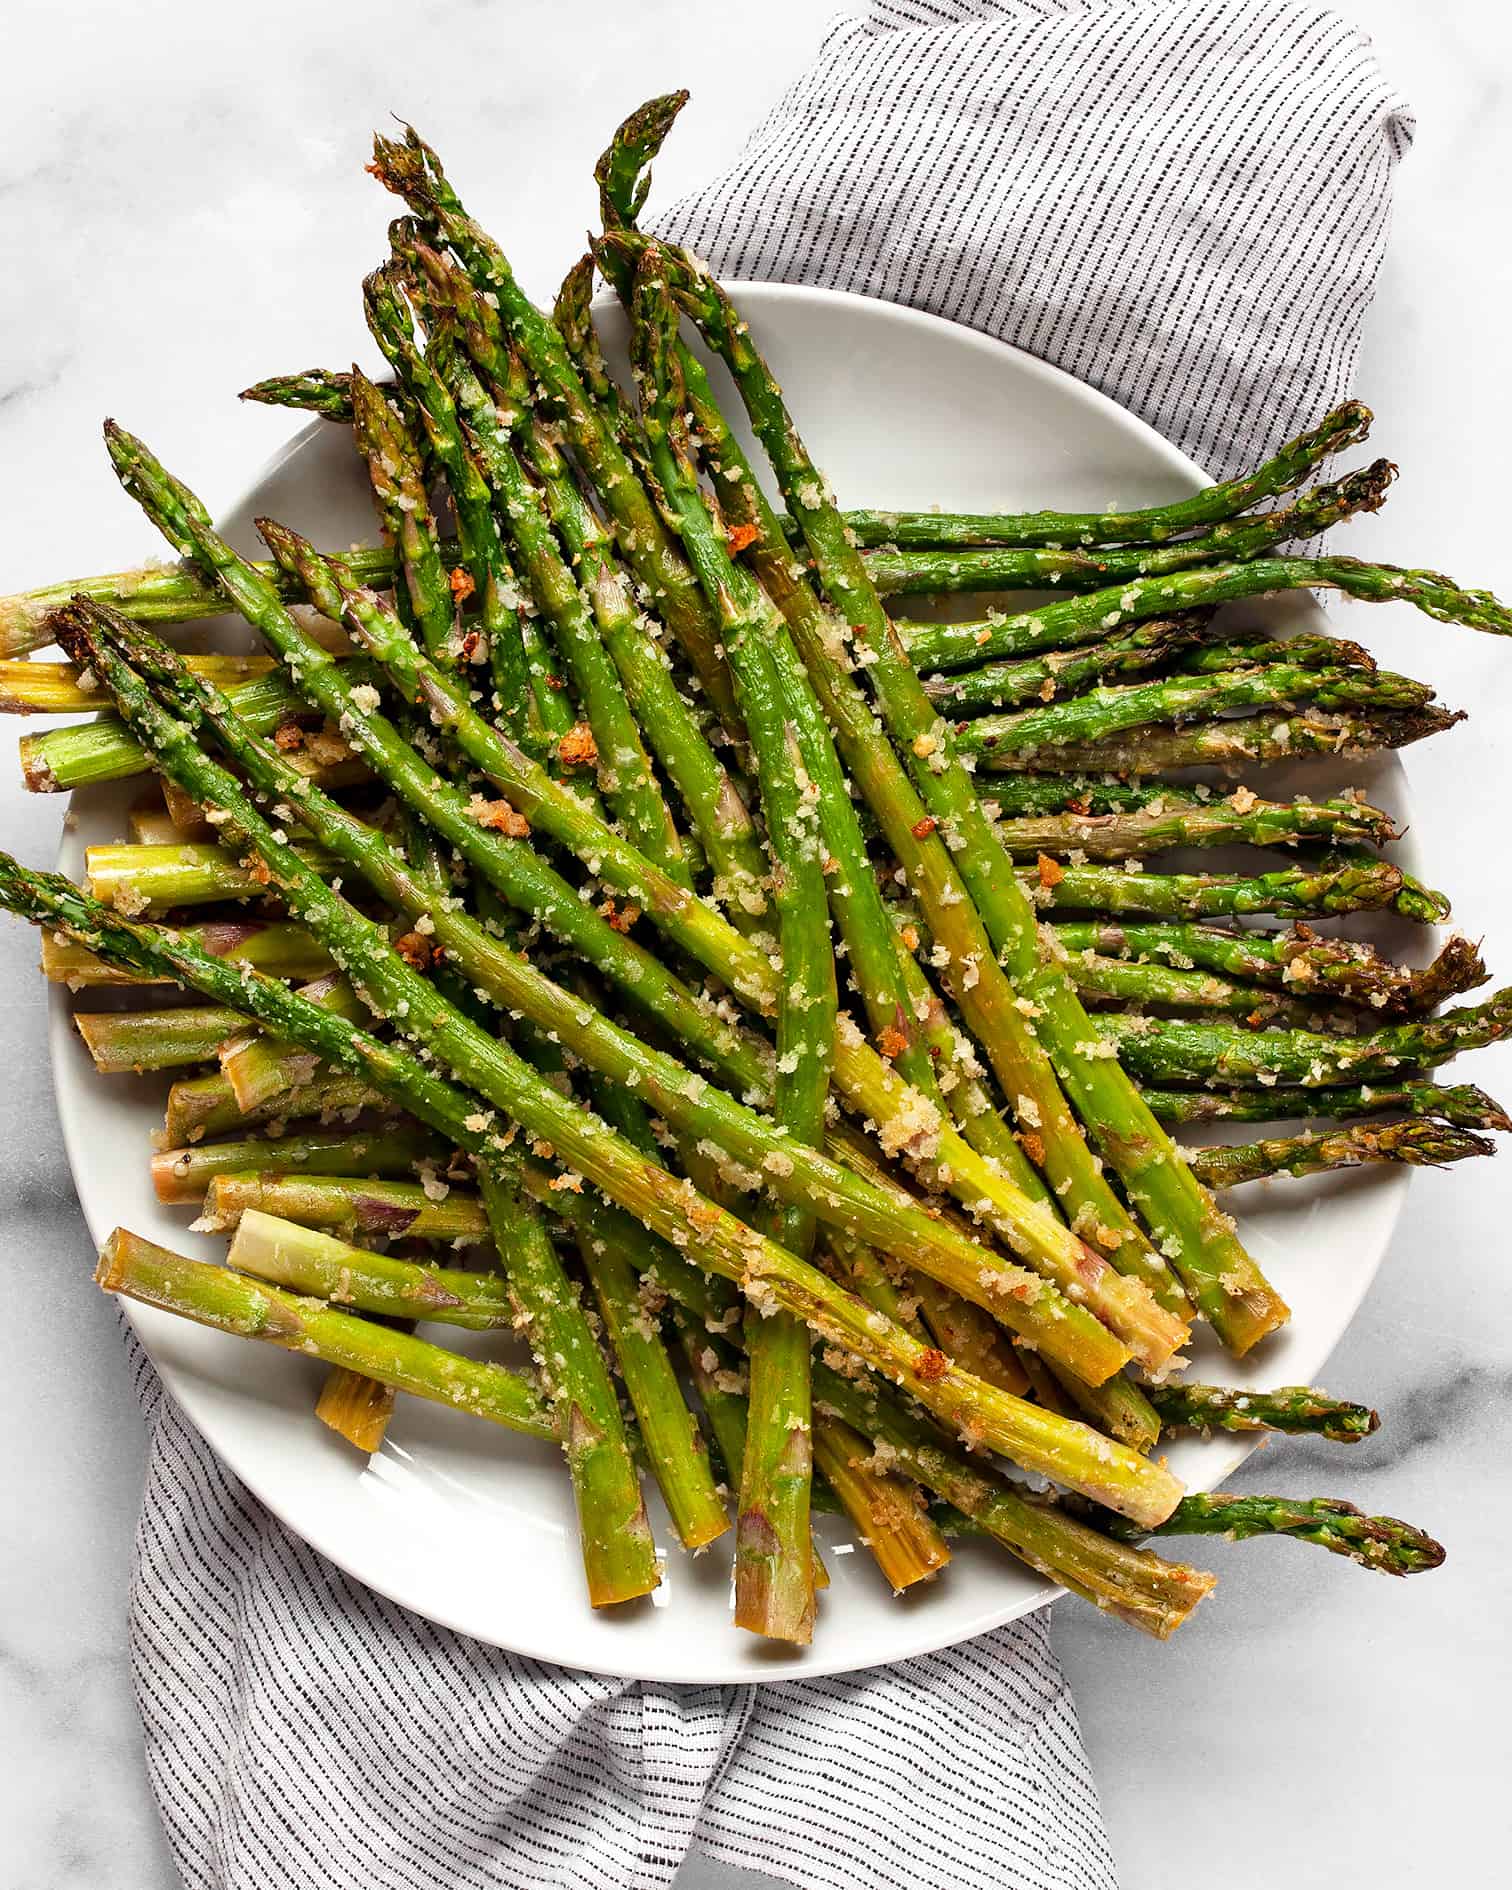 Roasted asparagus with parmesan and garlic on a plate.